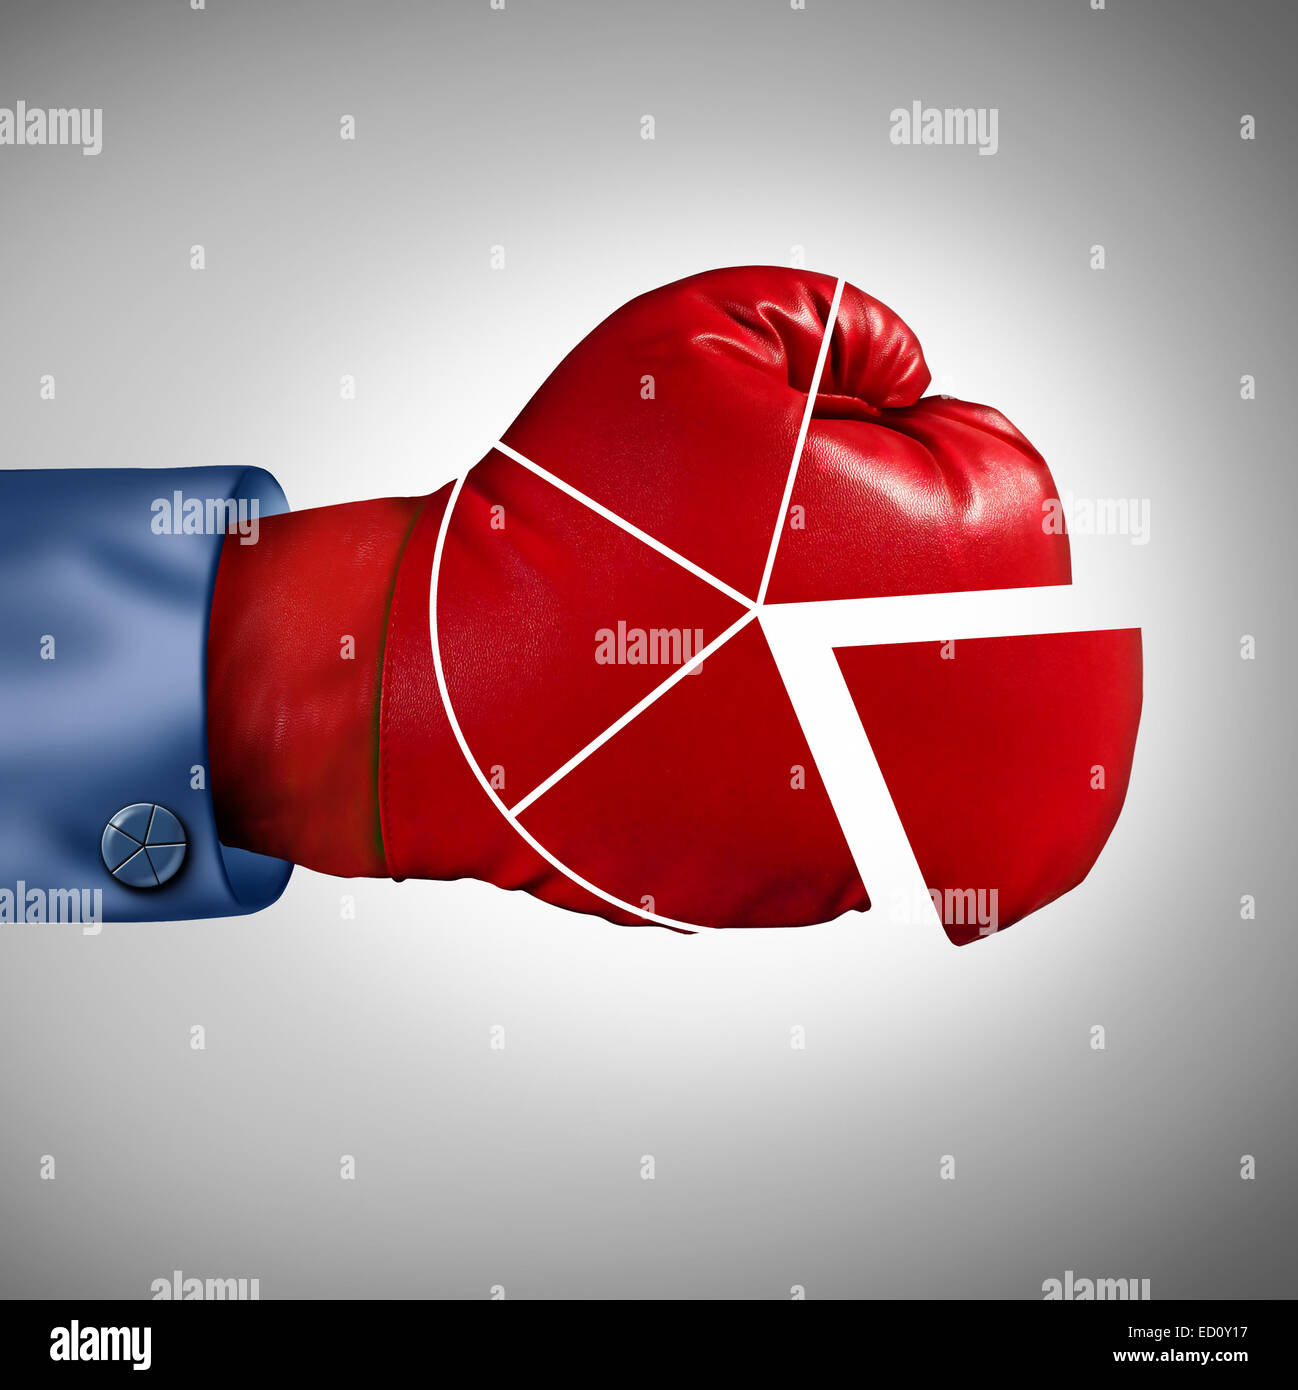 Competition market share loss business concept as a red boxing glove shaped as a financial pie chart diagram as a symbol for losing economic competitiveness. Stock Photo